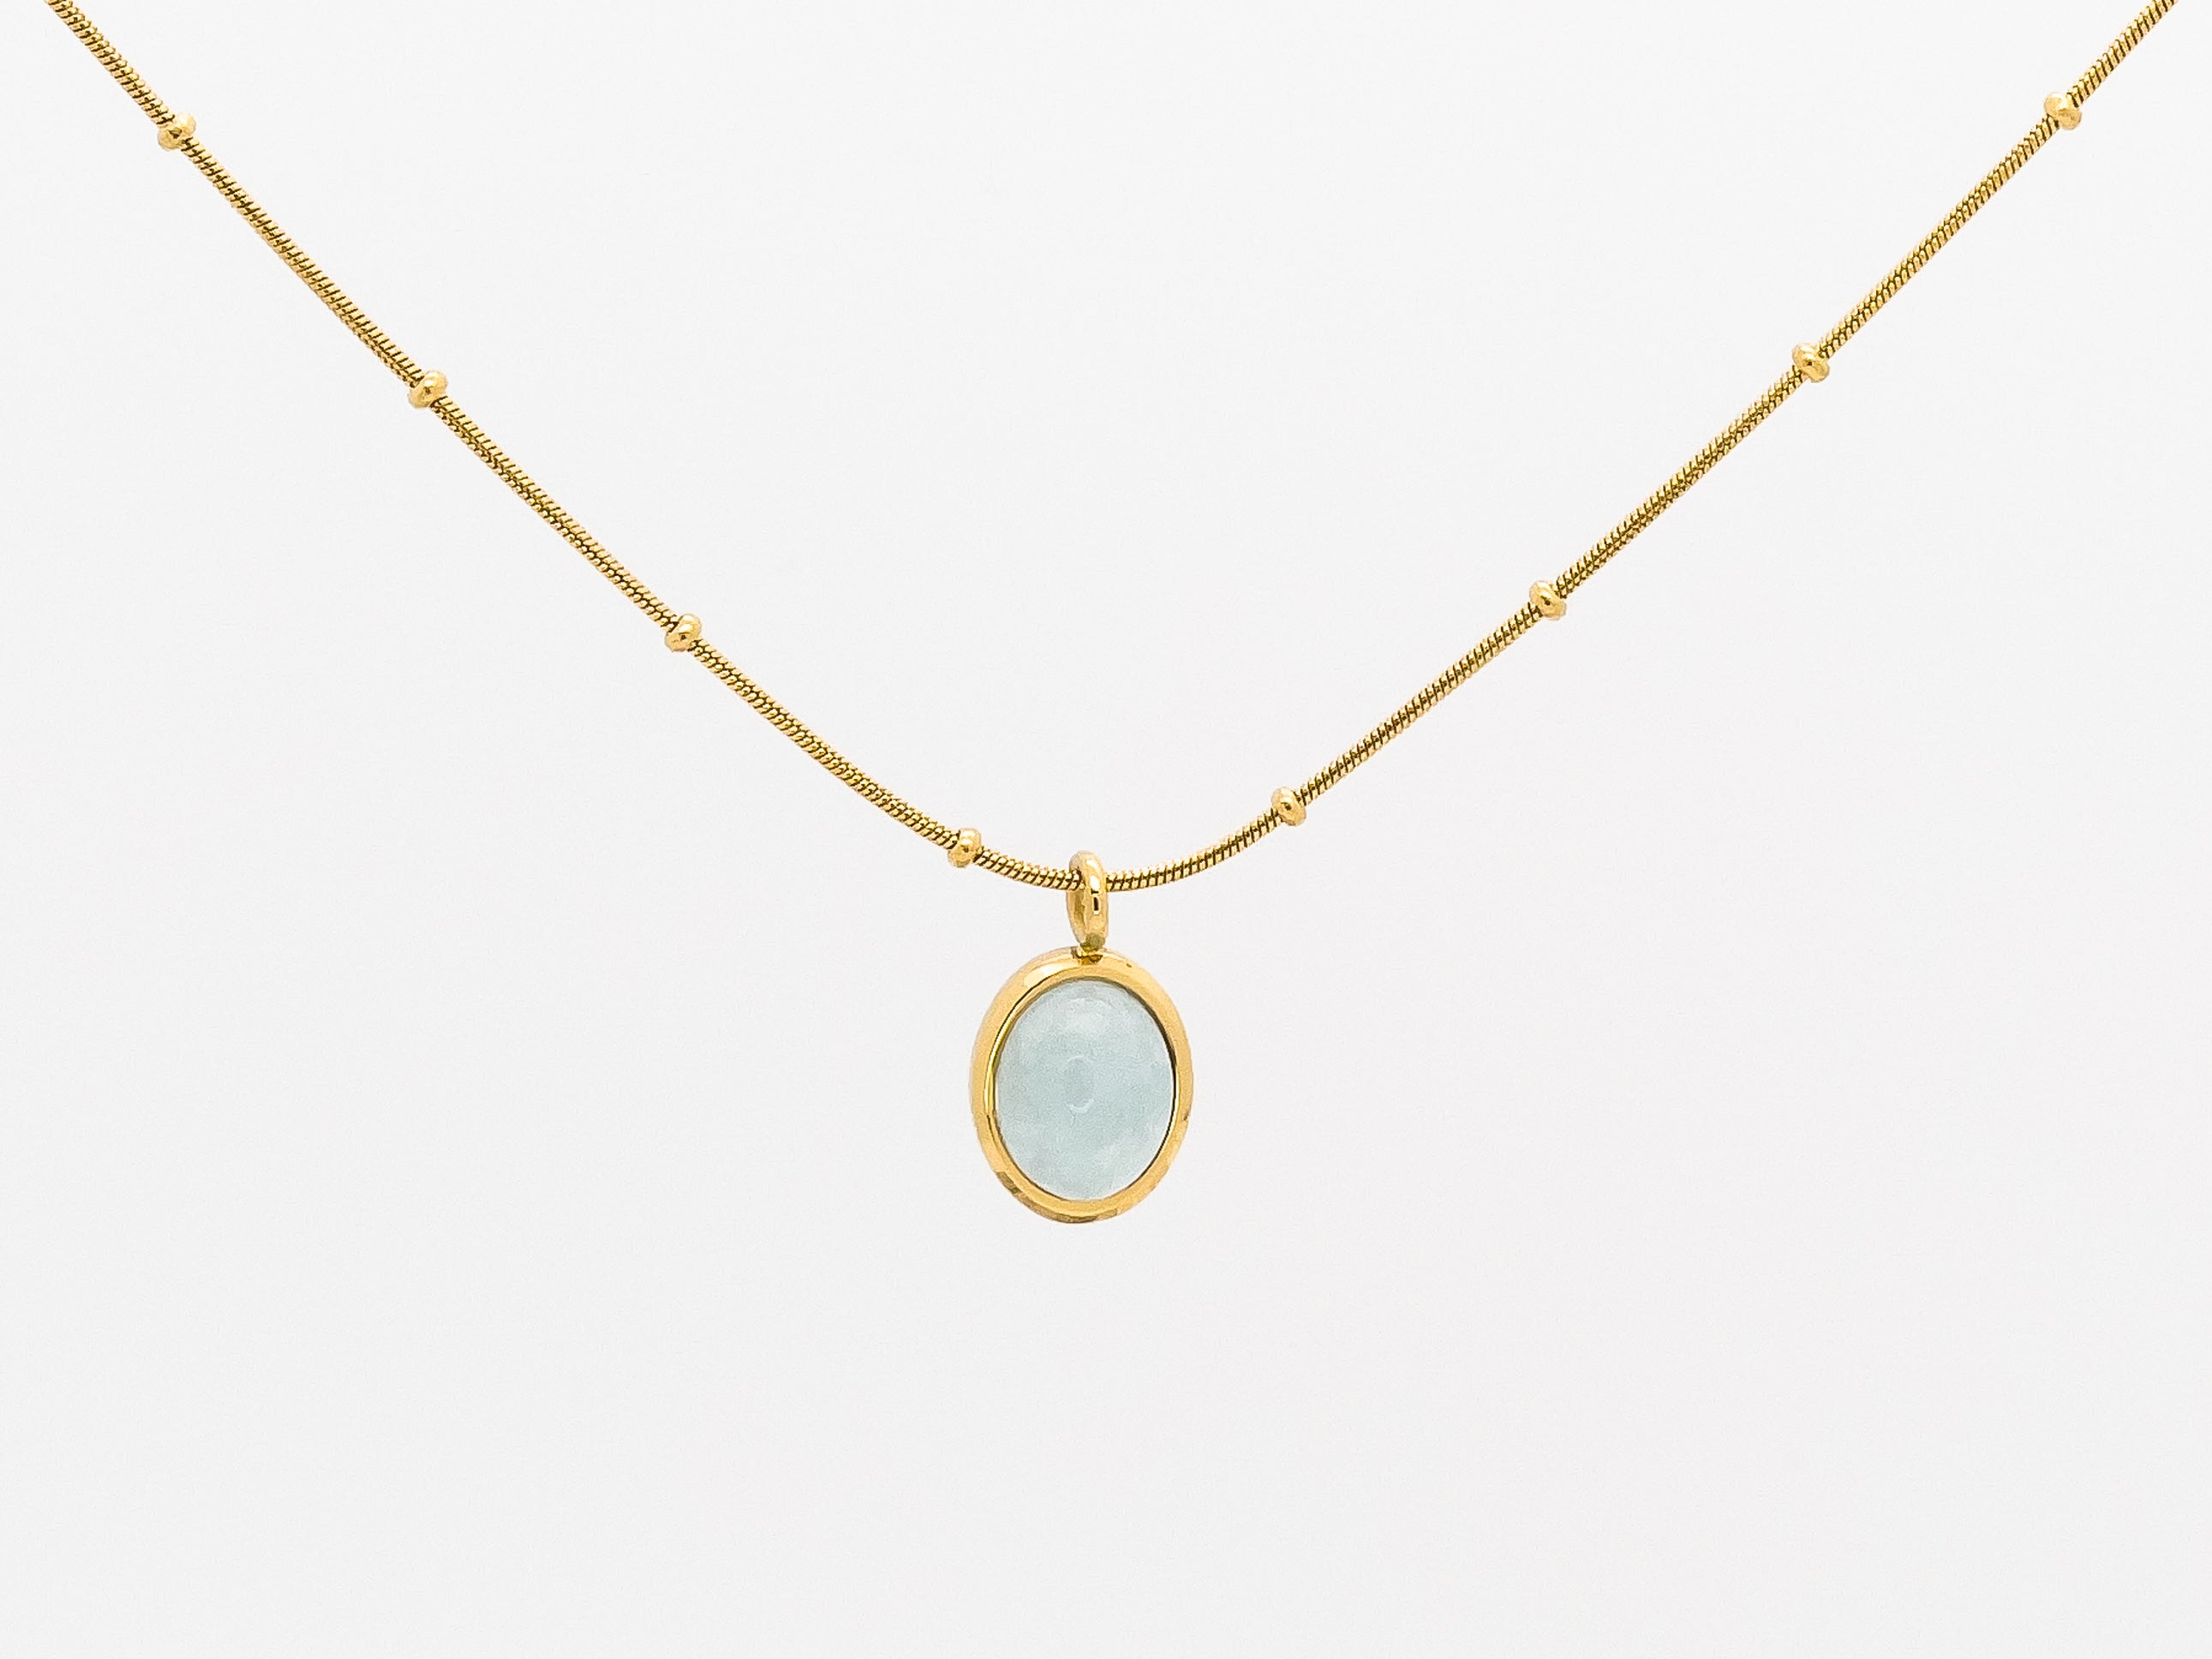 Aqua blue gemstone pendant necklace with gold chain